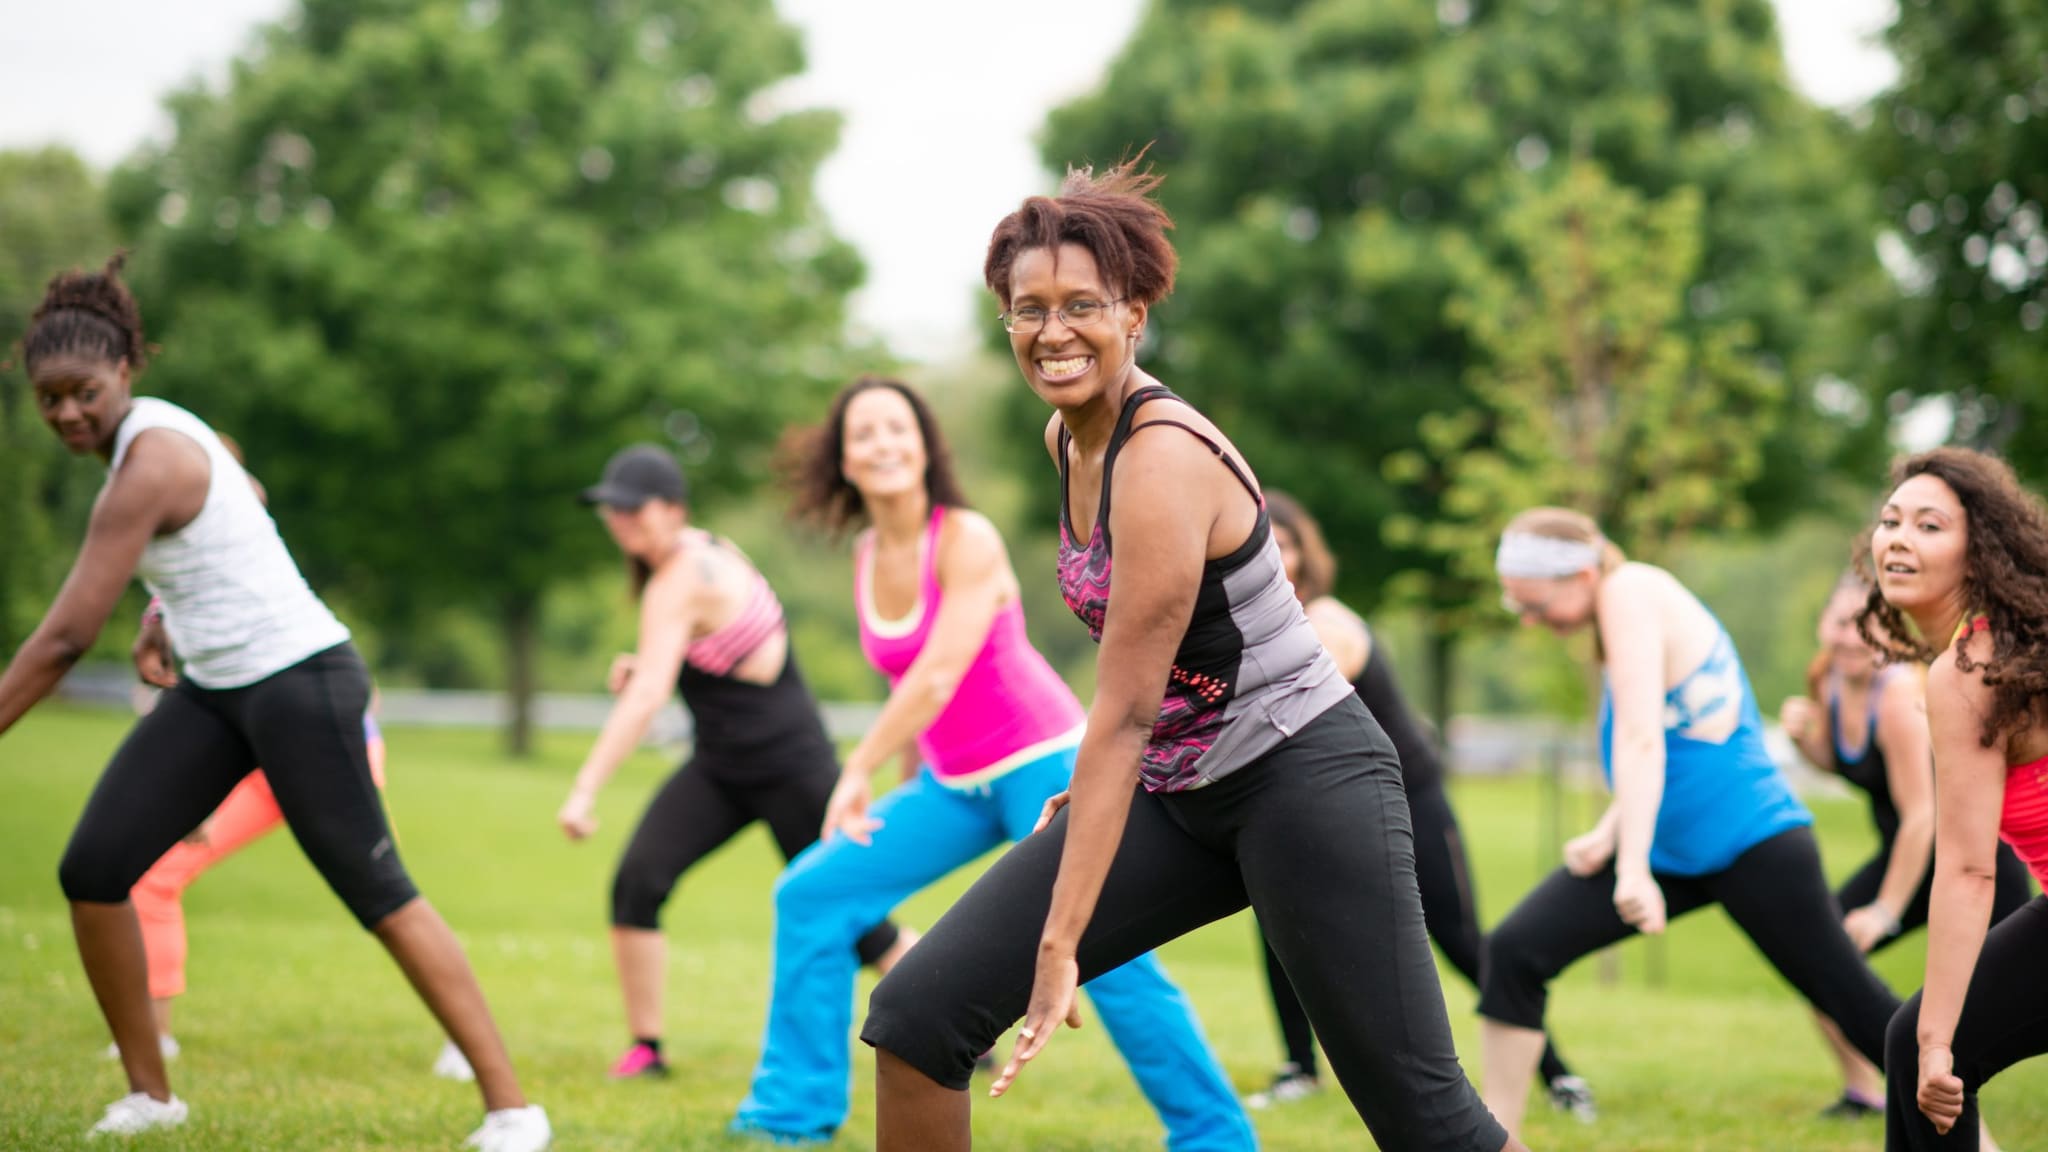 Women exercising in a park